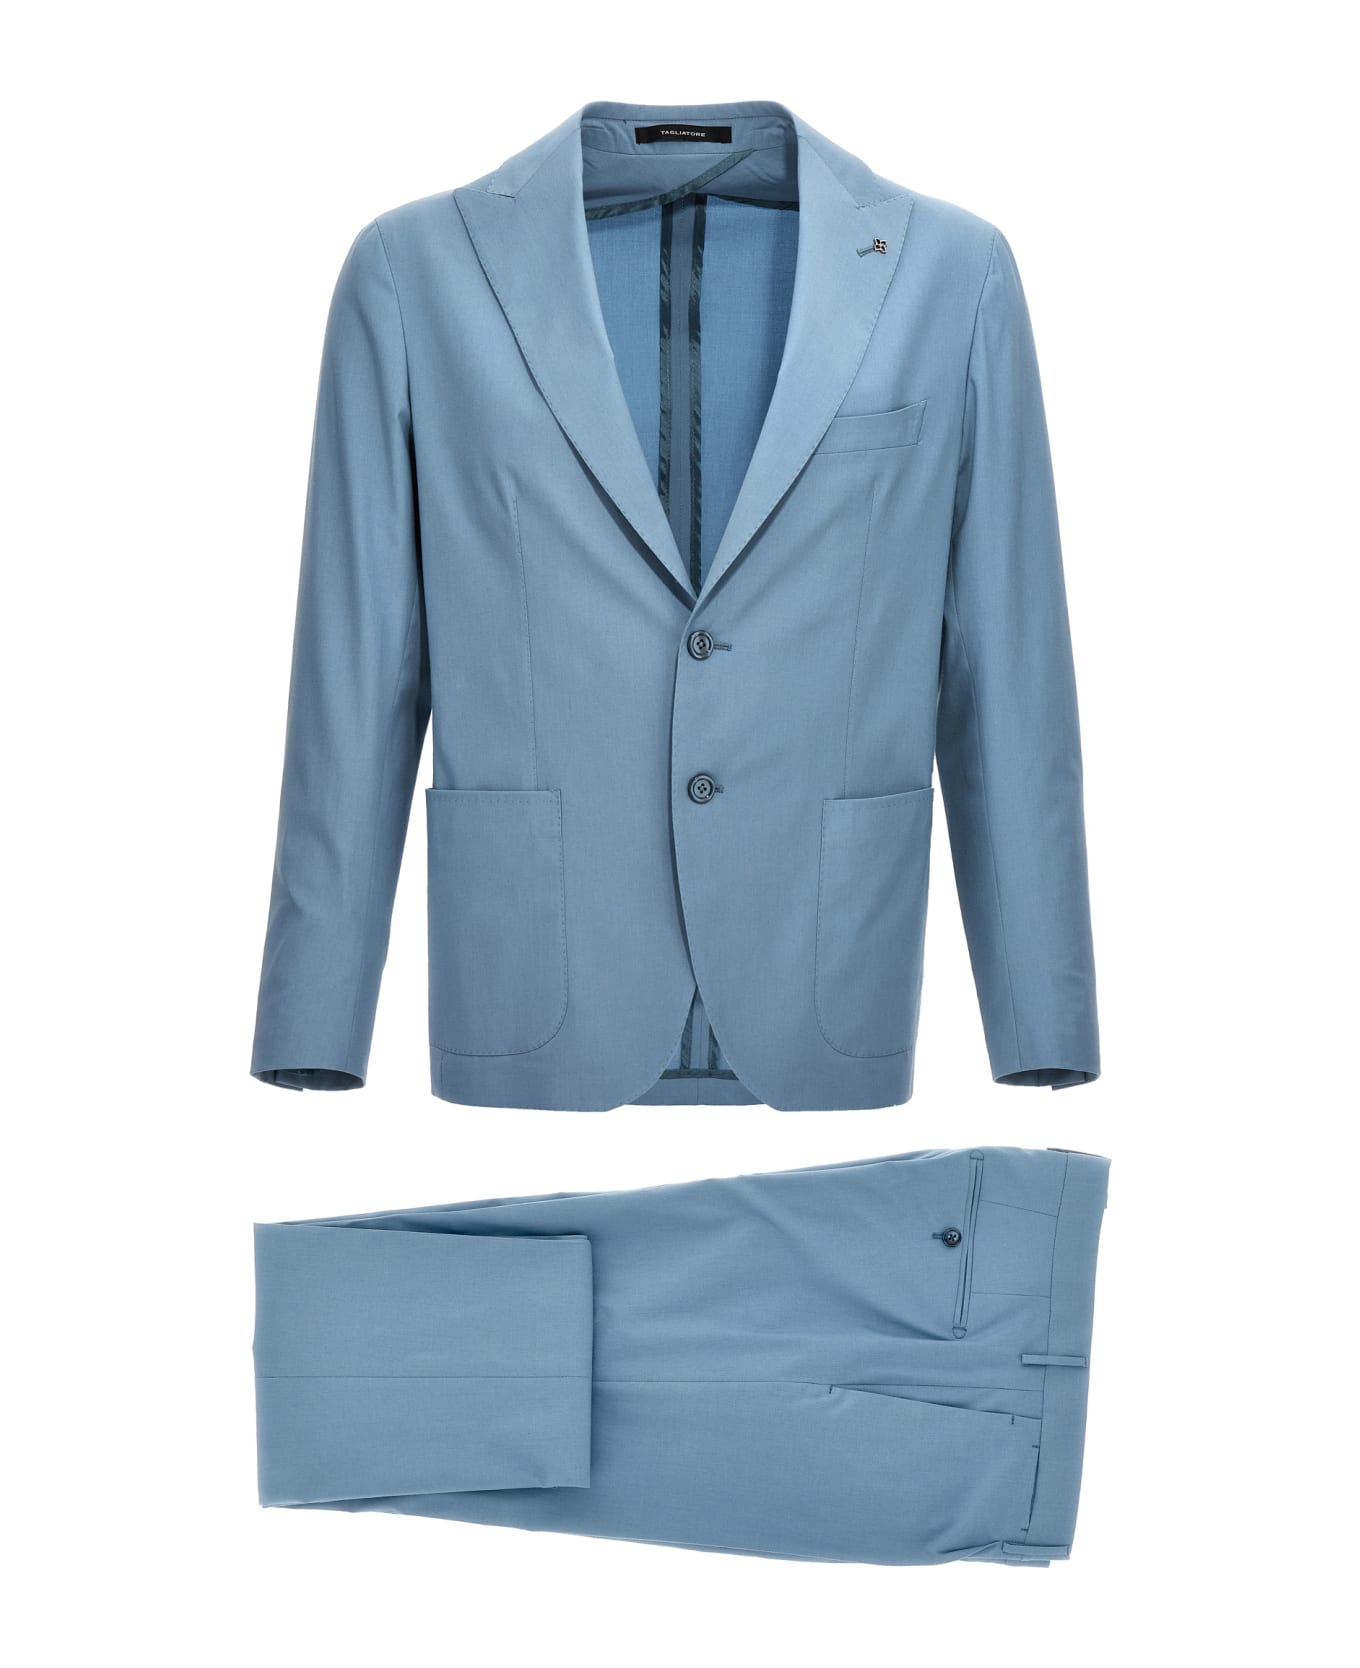 Tagliatore Single-breasted Cool Wool Suit - Light Blue